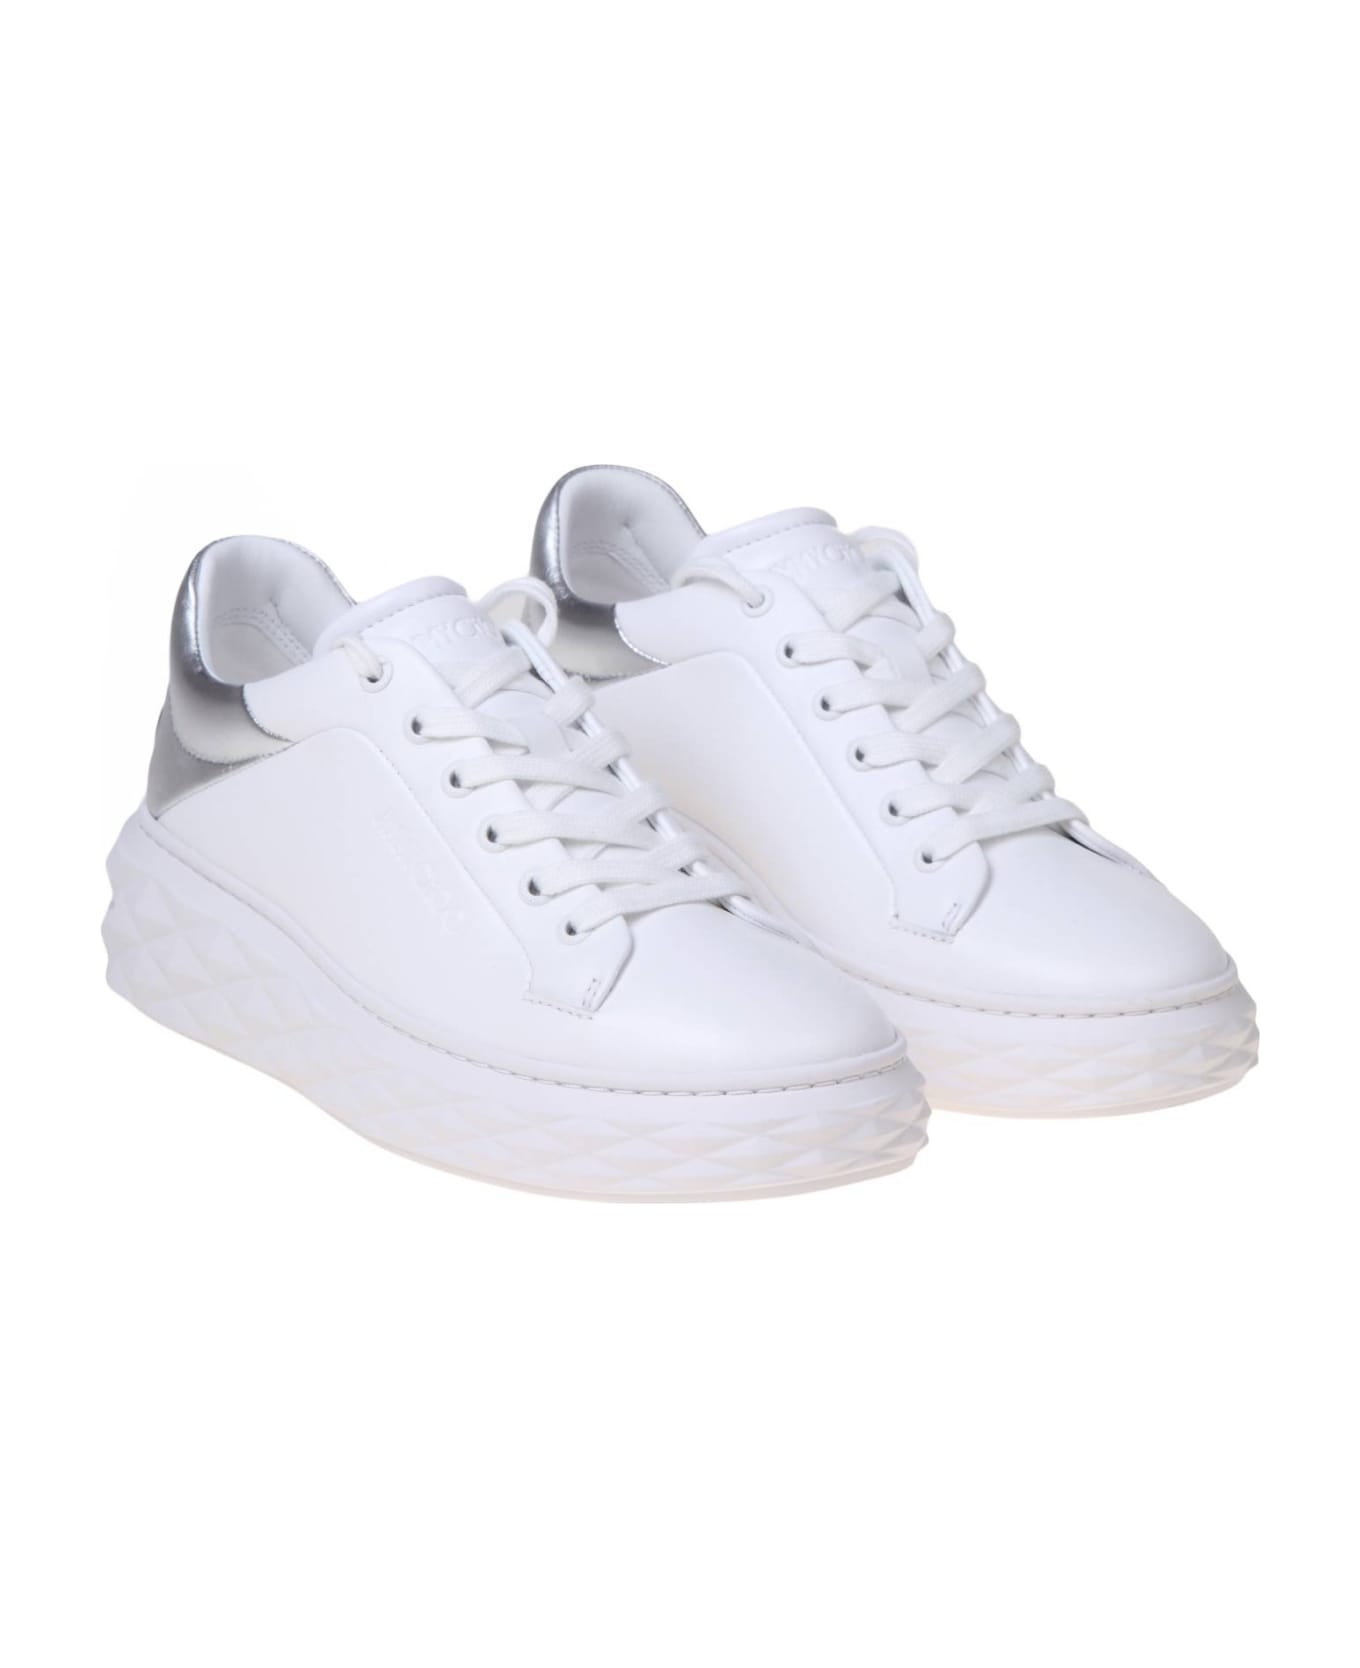 Jimmy Choo Diamond Maxi Sneakers In White And Silver Leather - White/Silver スニーカー